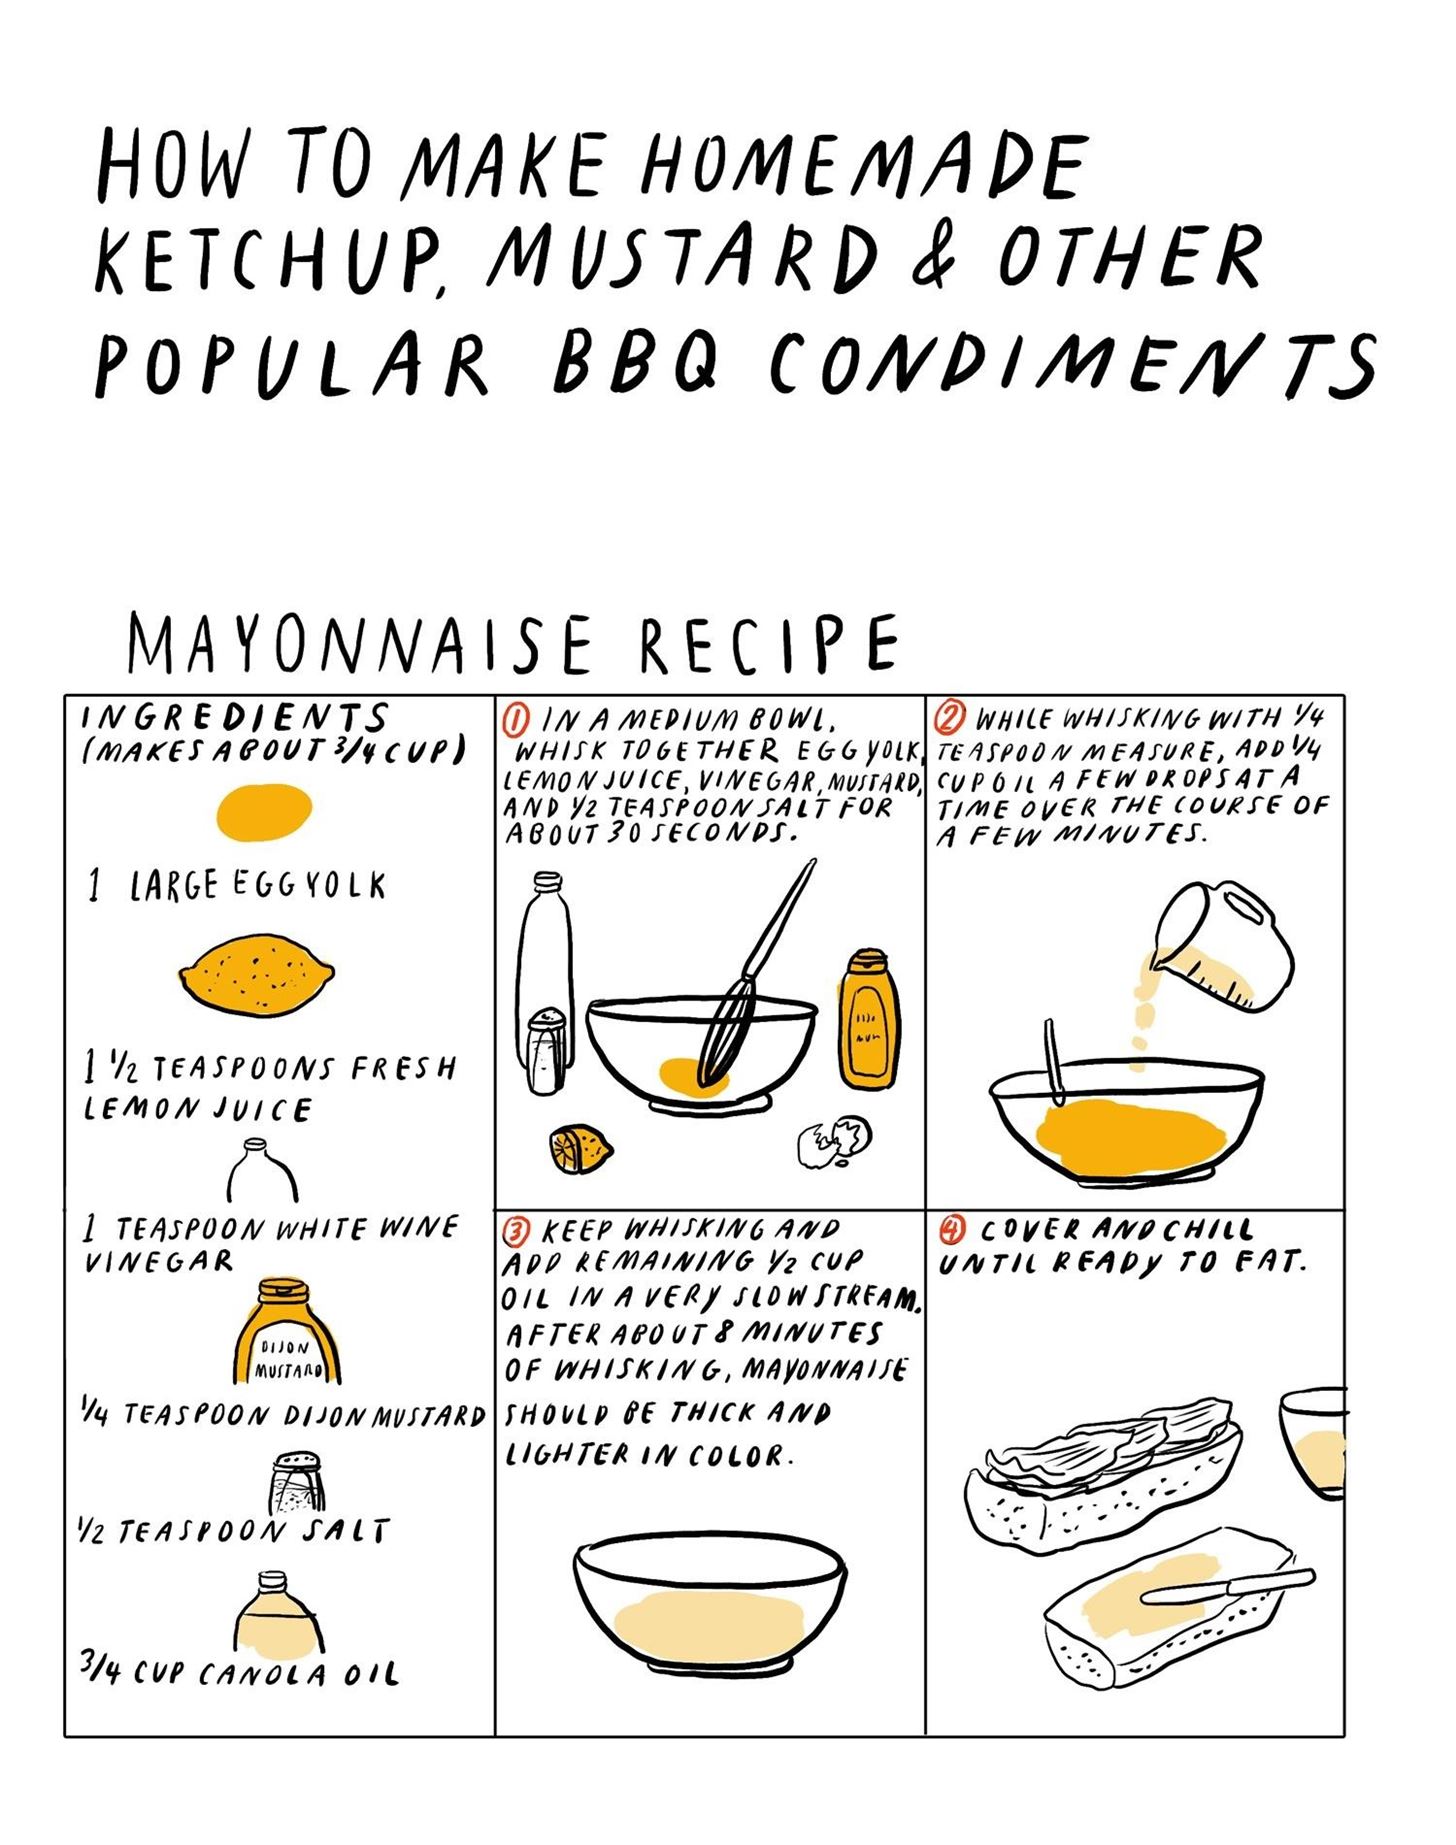 How to Make Homemade Ketchup, Mustard, & Other Common BBQ